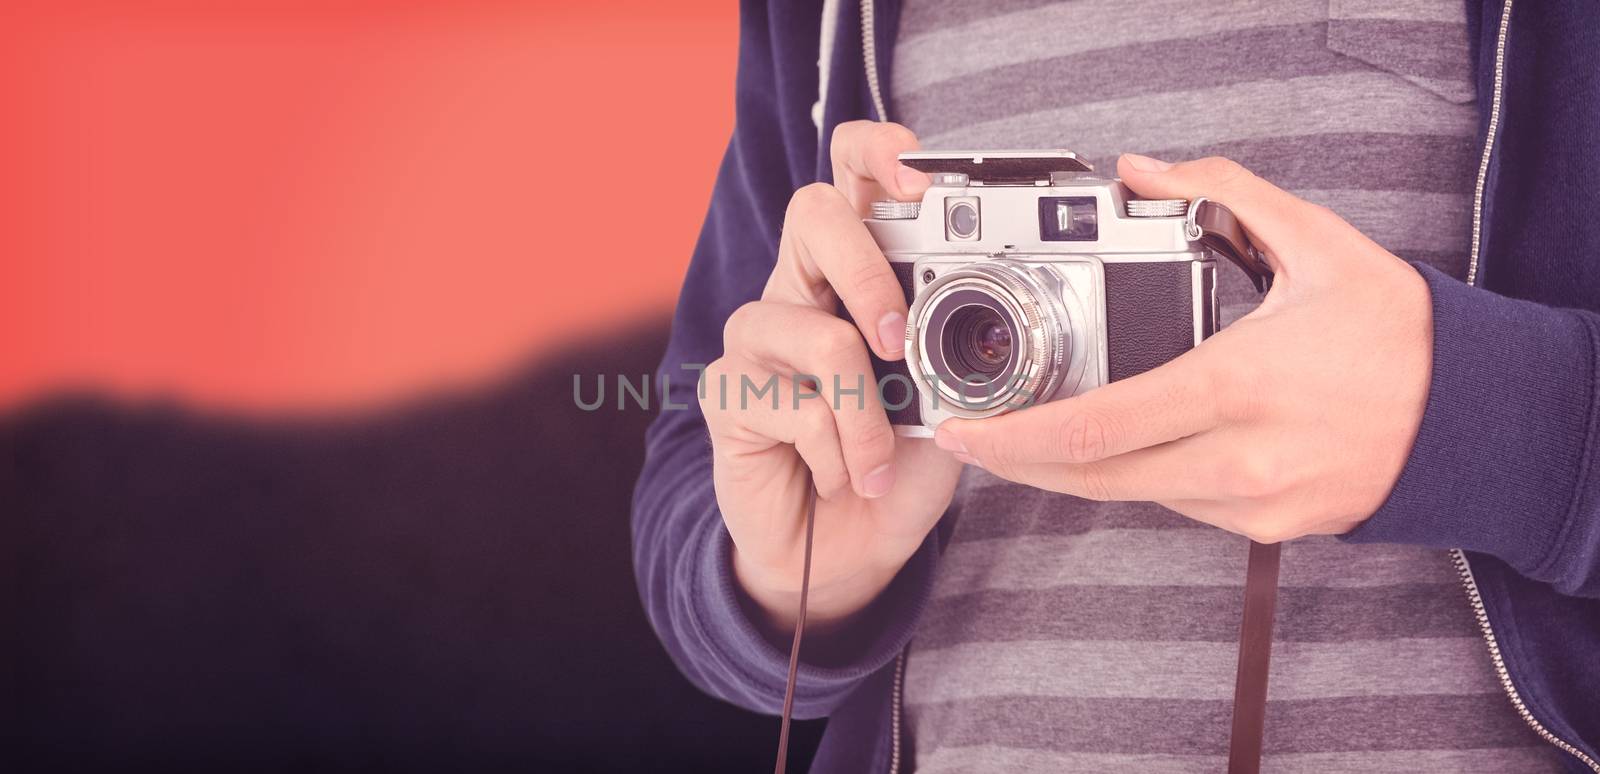 Mid section of man with camera against blurred mountains